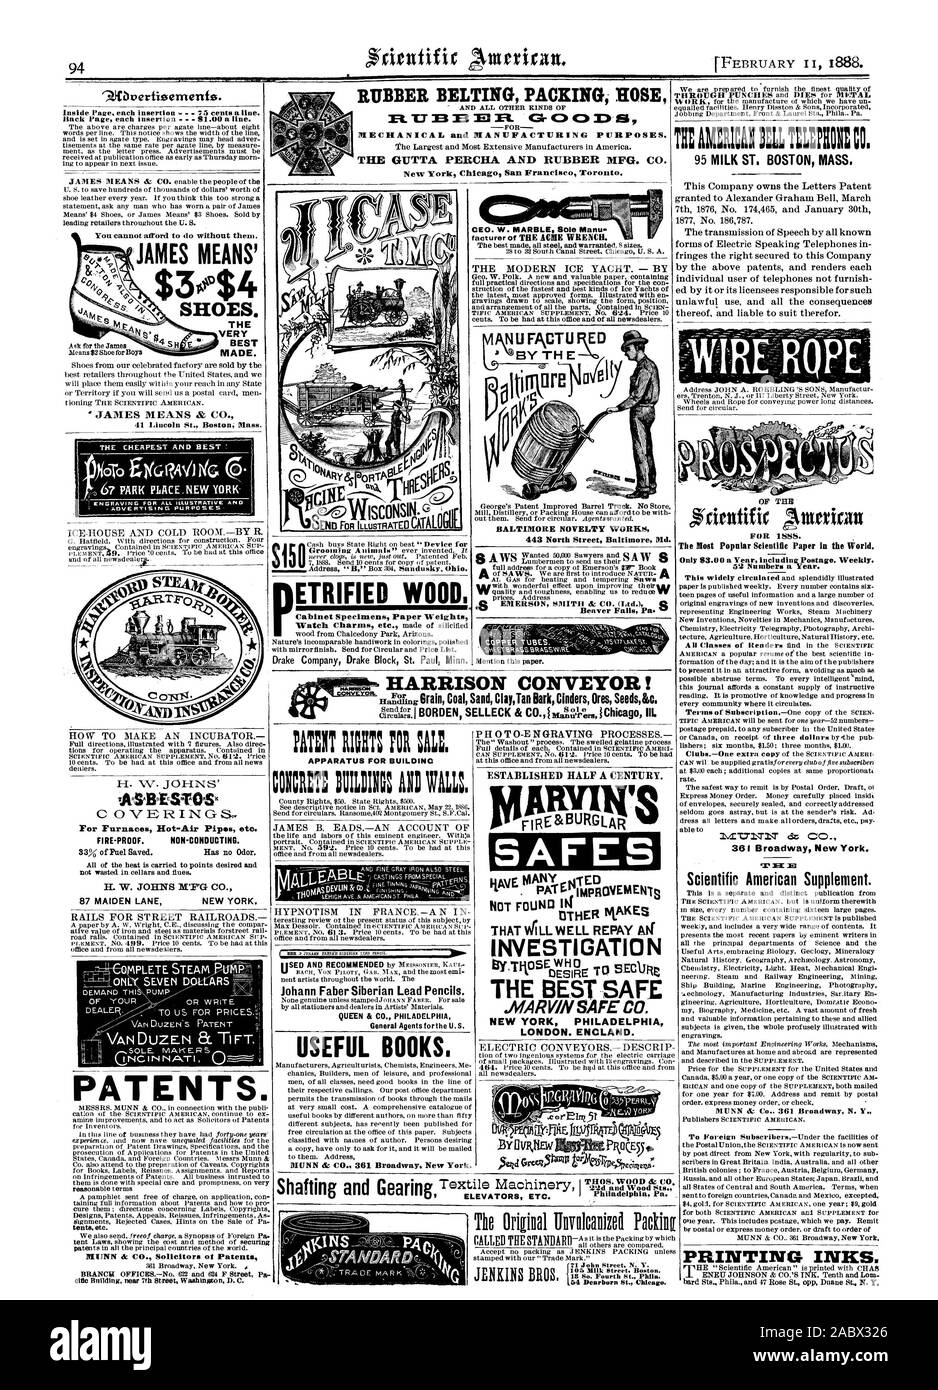 PATENTS. reasonable terms cific Building near 7th Street Washington RUBBER BELTING PACKING ROBE BALTIMORE NOVELTY WORKS 443 North Street Baltimore Md. Aitin SAFES am THAT WILL LL INVESTIGATION THE BEST SAFE NEW YORK PHILADELPHIA LONDON. ENGLAND. THE VERY BEST MADE. 9Jibpertisernenfo. Inside Page. each insertion - :5 cents aline. Back Page each insertion  91.00 a line. You cannot afford to do without them. JAMES MEANS $344 THE CHEAPEST AND BEST : Beaver Falls Fa. ` COPPER TUBES. Mention thls paper. .40rE1riz5t filITAZ-9544WAil.k3Yiiinan kti PROM(fhp; HARRISON CONVEYOR! PAMIT RIGHTS III Sta Stock Photo